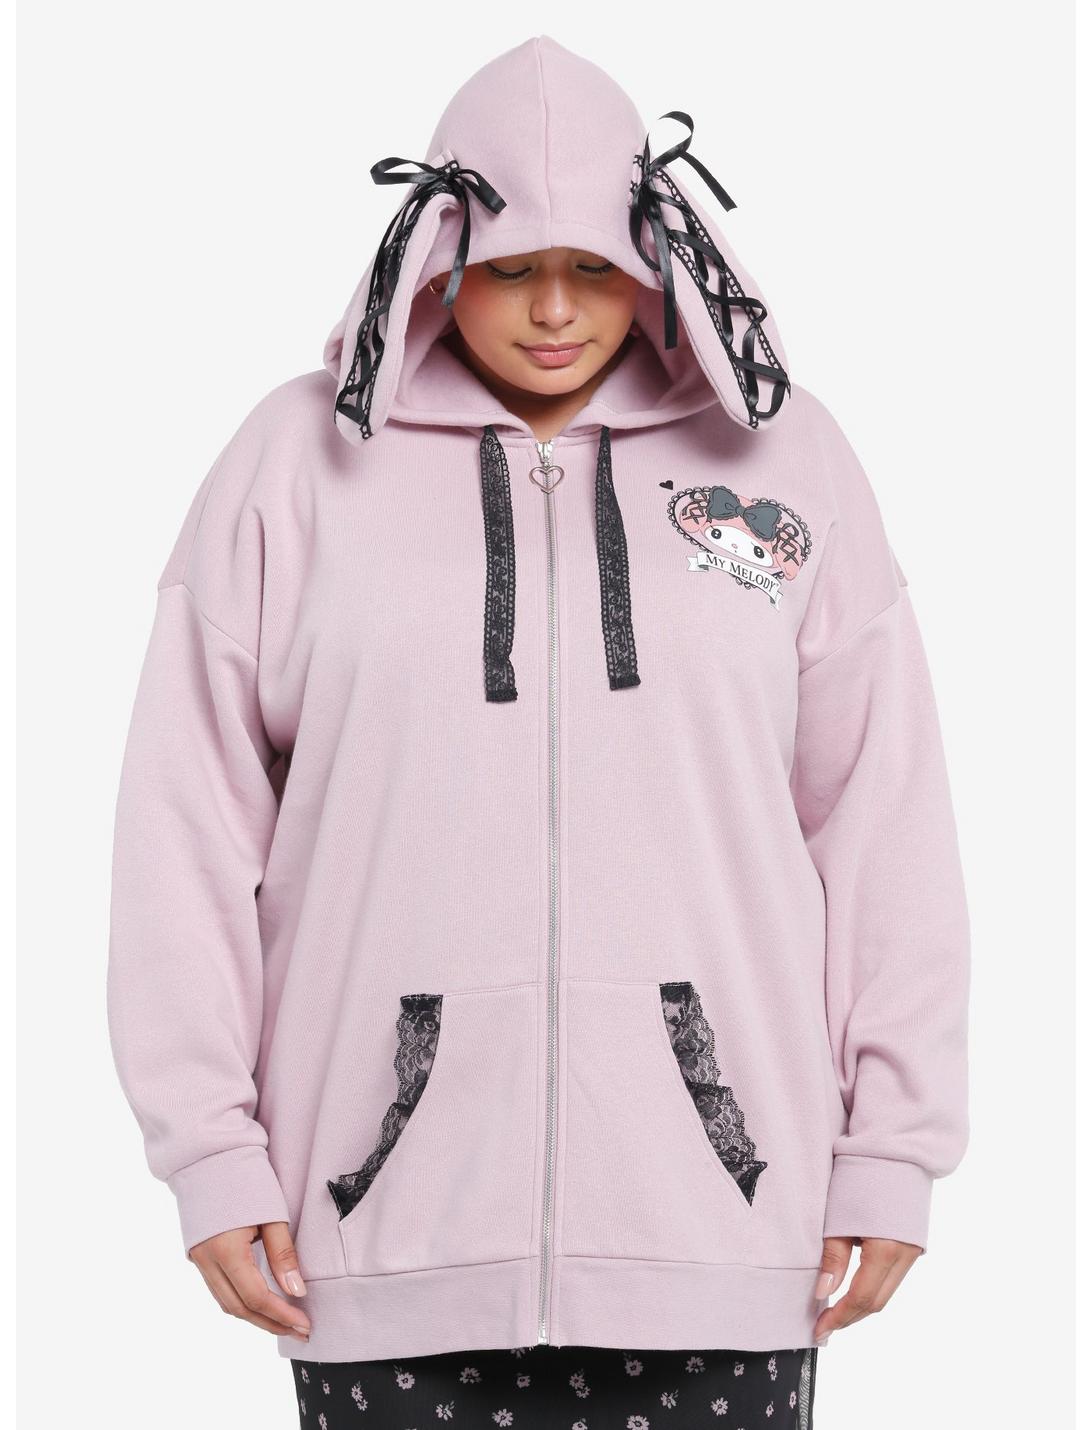 My Melody Lolita Lace 3D Ear Hoodie Plus Size, MULTI, hi-res